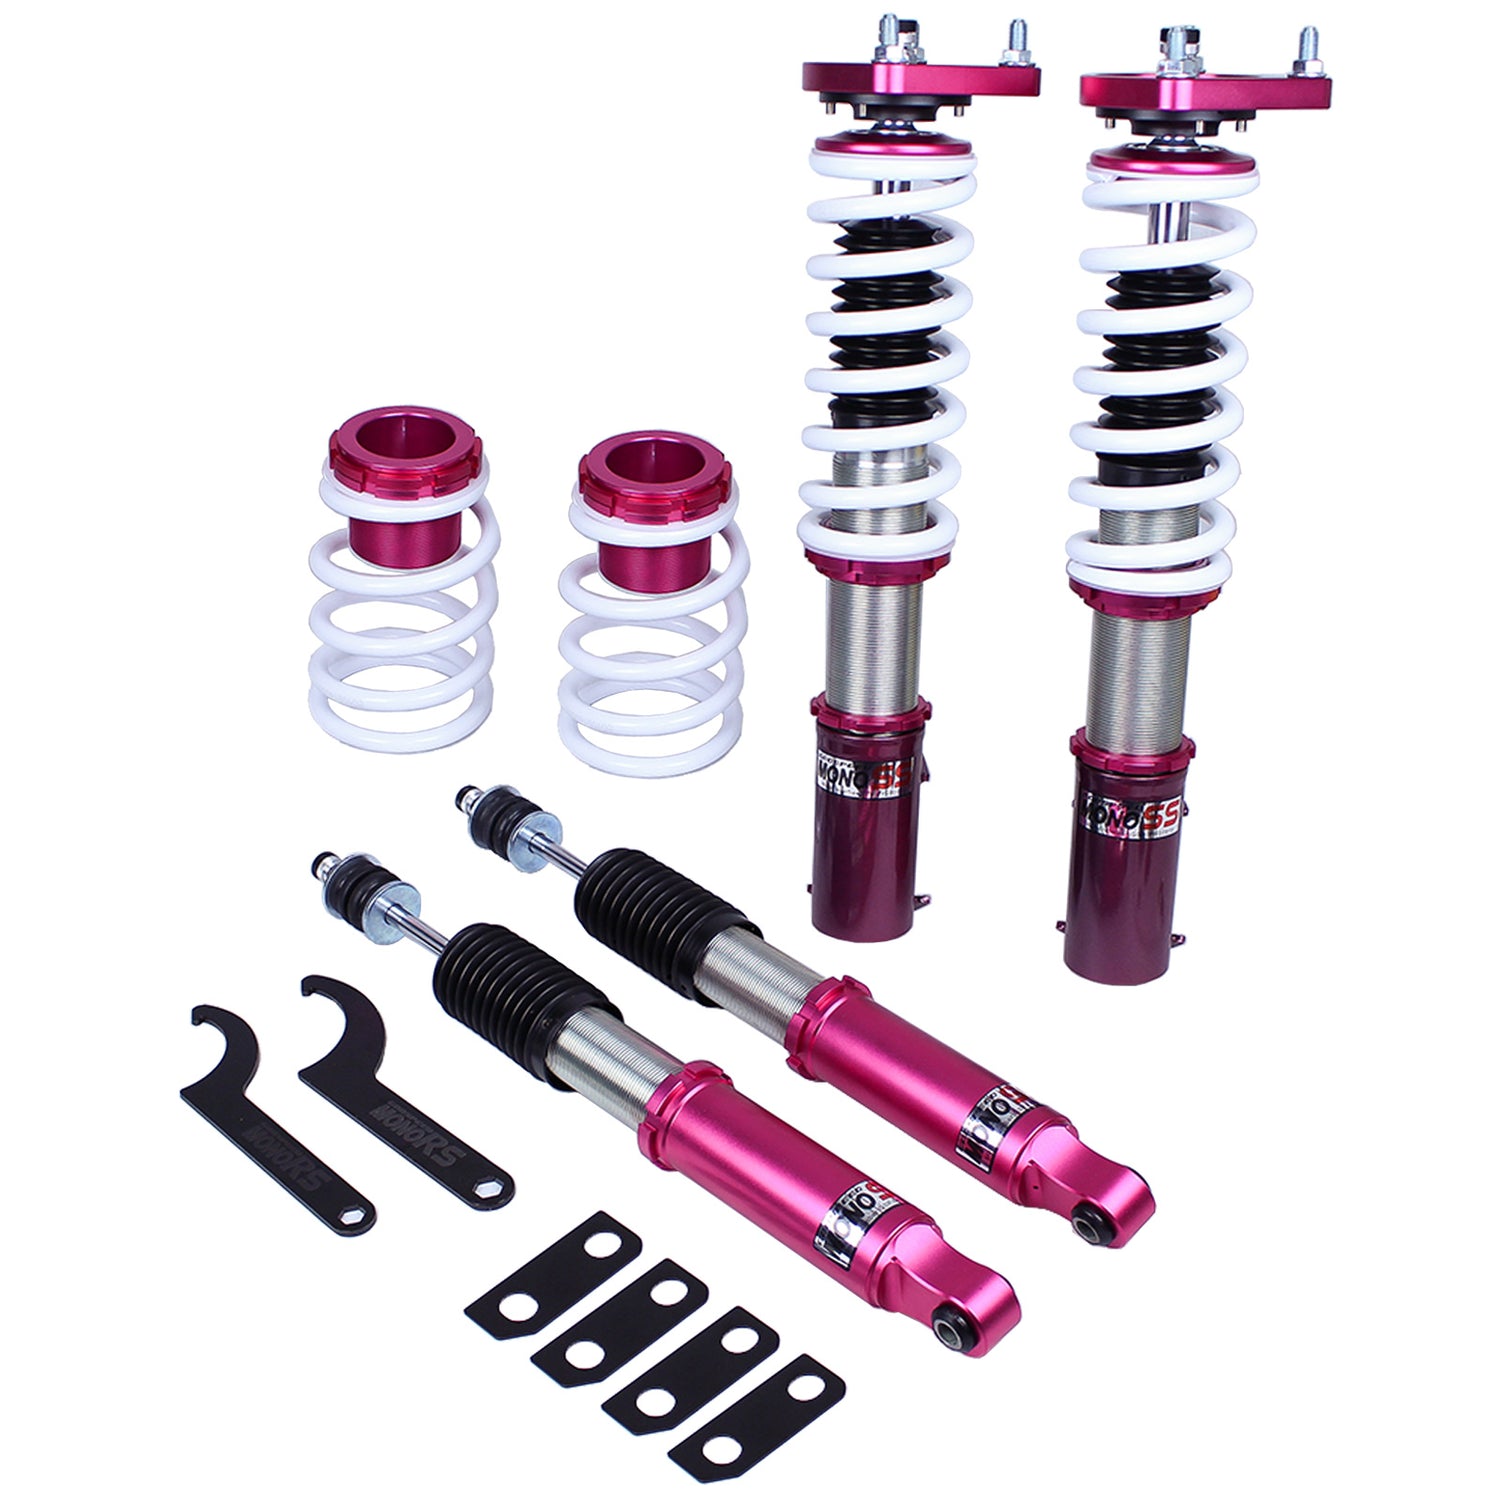 Godspeed MSS0910 MonoSS Coilover Lowering Kit, Fully Adjustable, Ride Height, Spring Tension And 16 Click Damping, Ford Mustang 1994-04